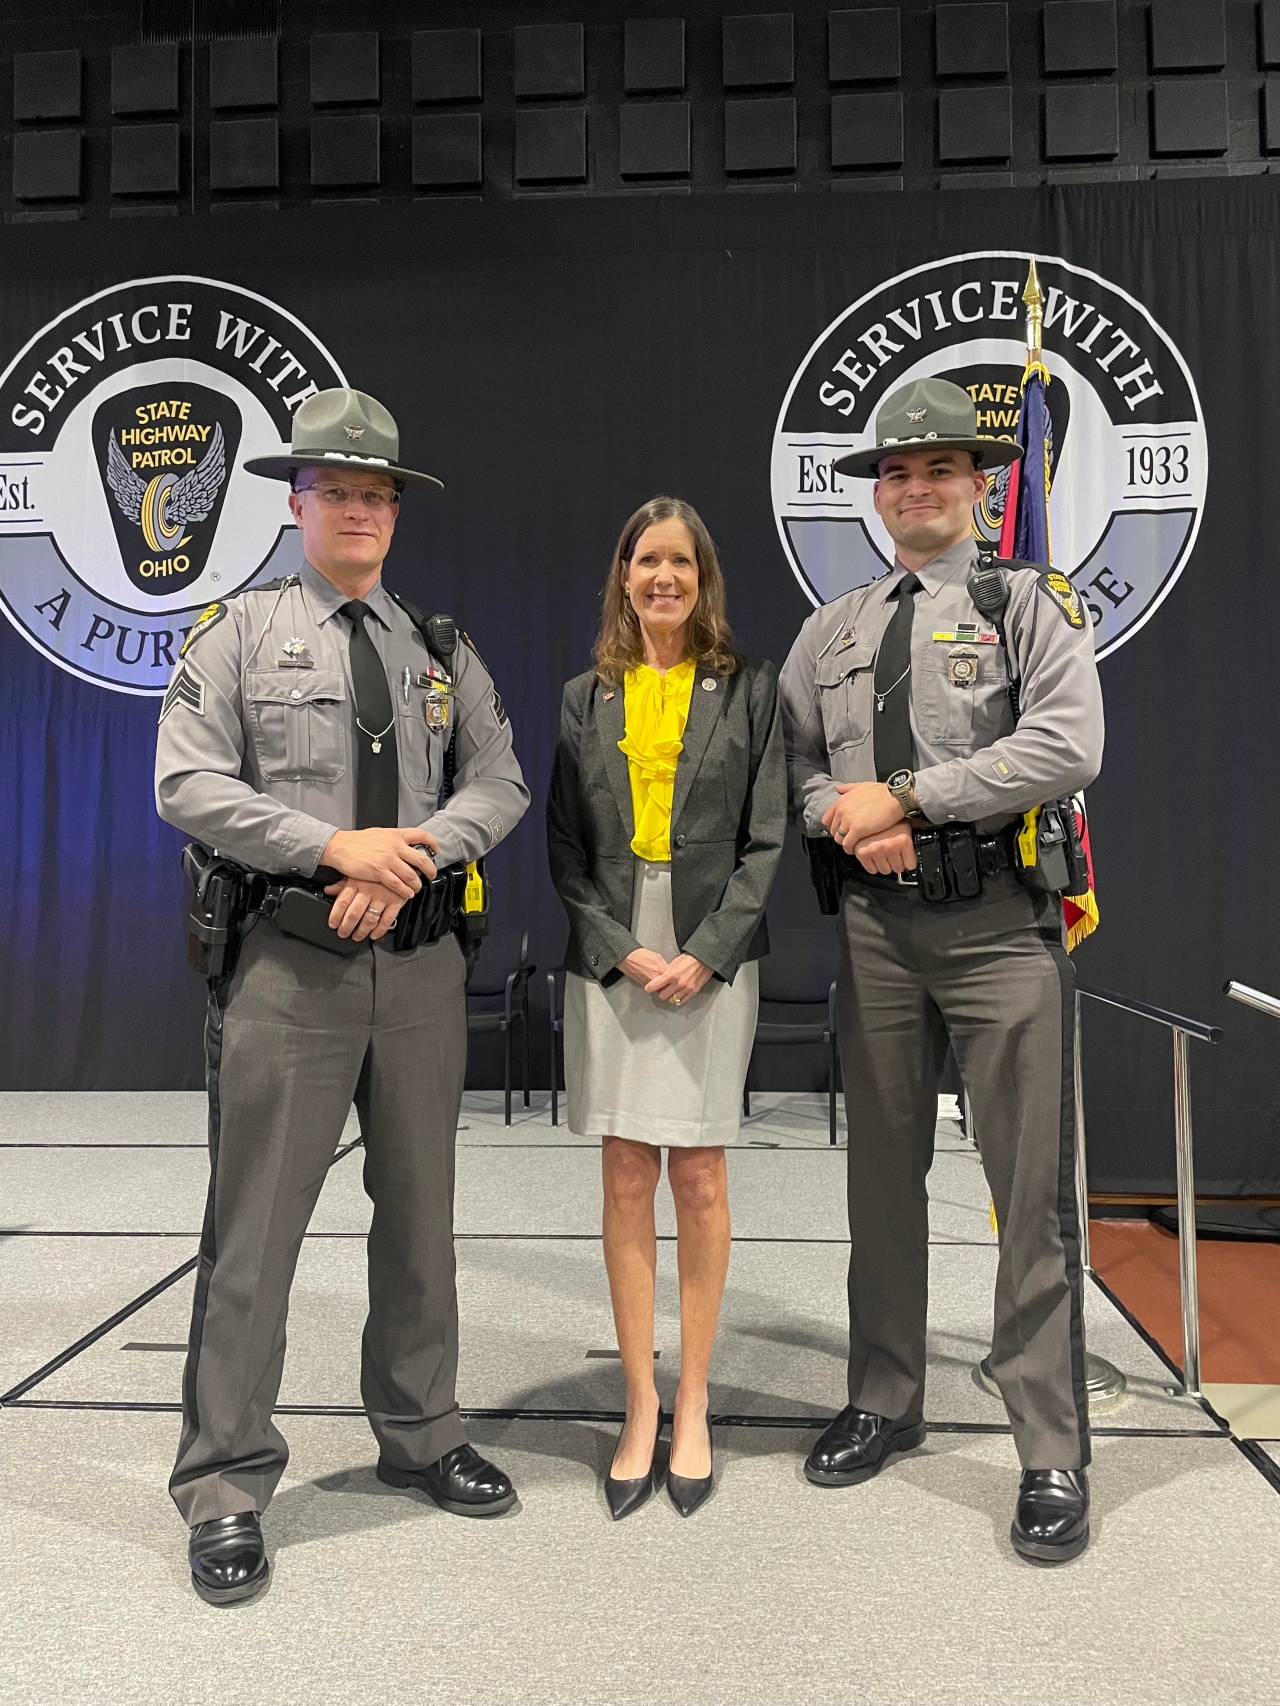 Representative Richardson spoke at the graduation of Ohio State Highway Patrol's 172nd Cadet class. Following her speech, she met with Troopers assigned to posts local to the 86th House District.